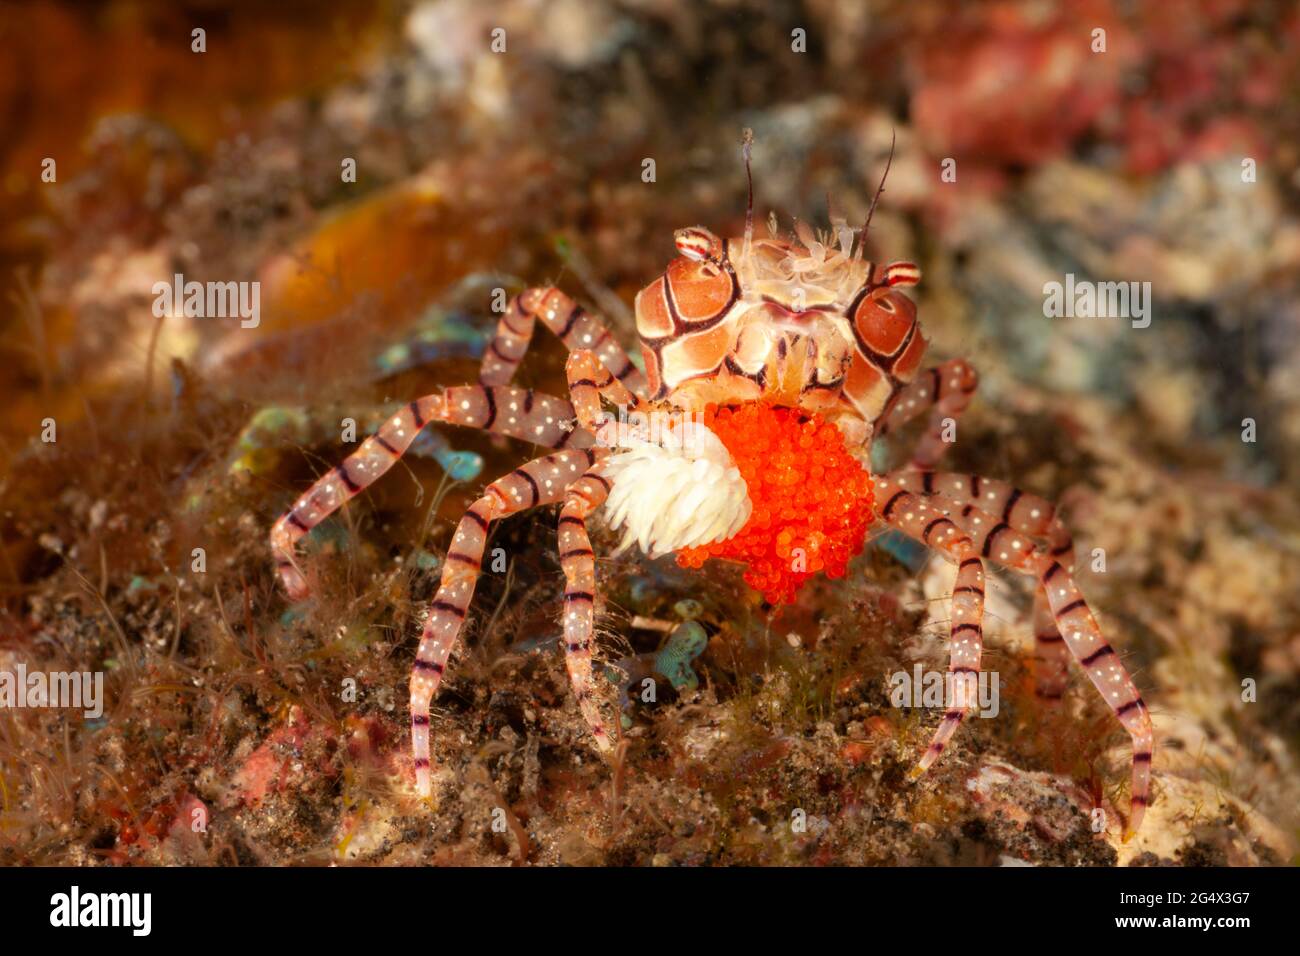 This pom-pom crab or mosaic boxer crab, Lybia tesselata, is carry a large egg mass along with its associated anemones, Triactis producta, that it carr Stock Photo